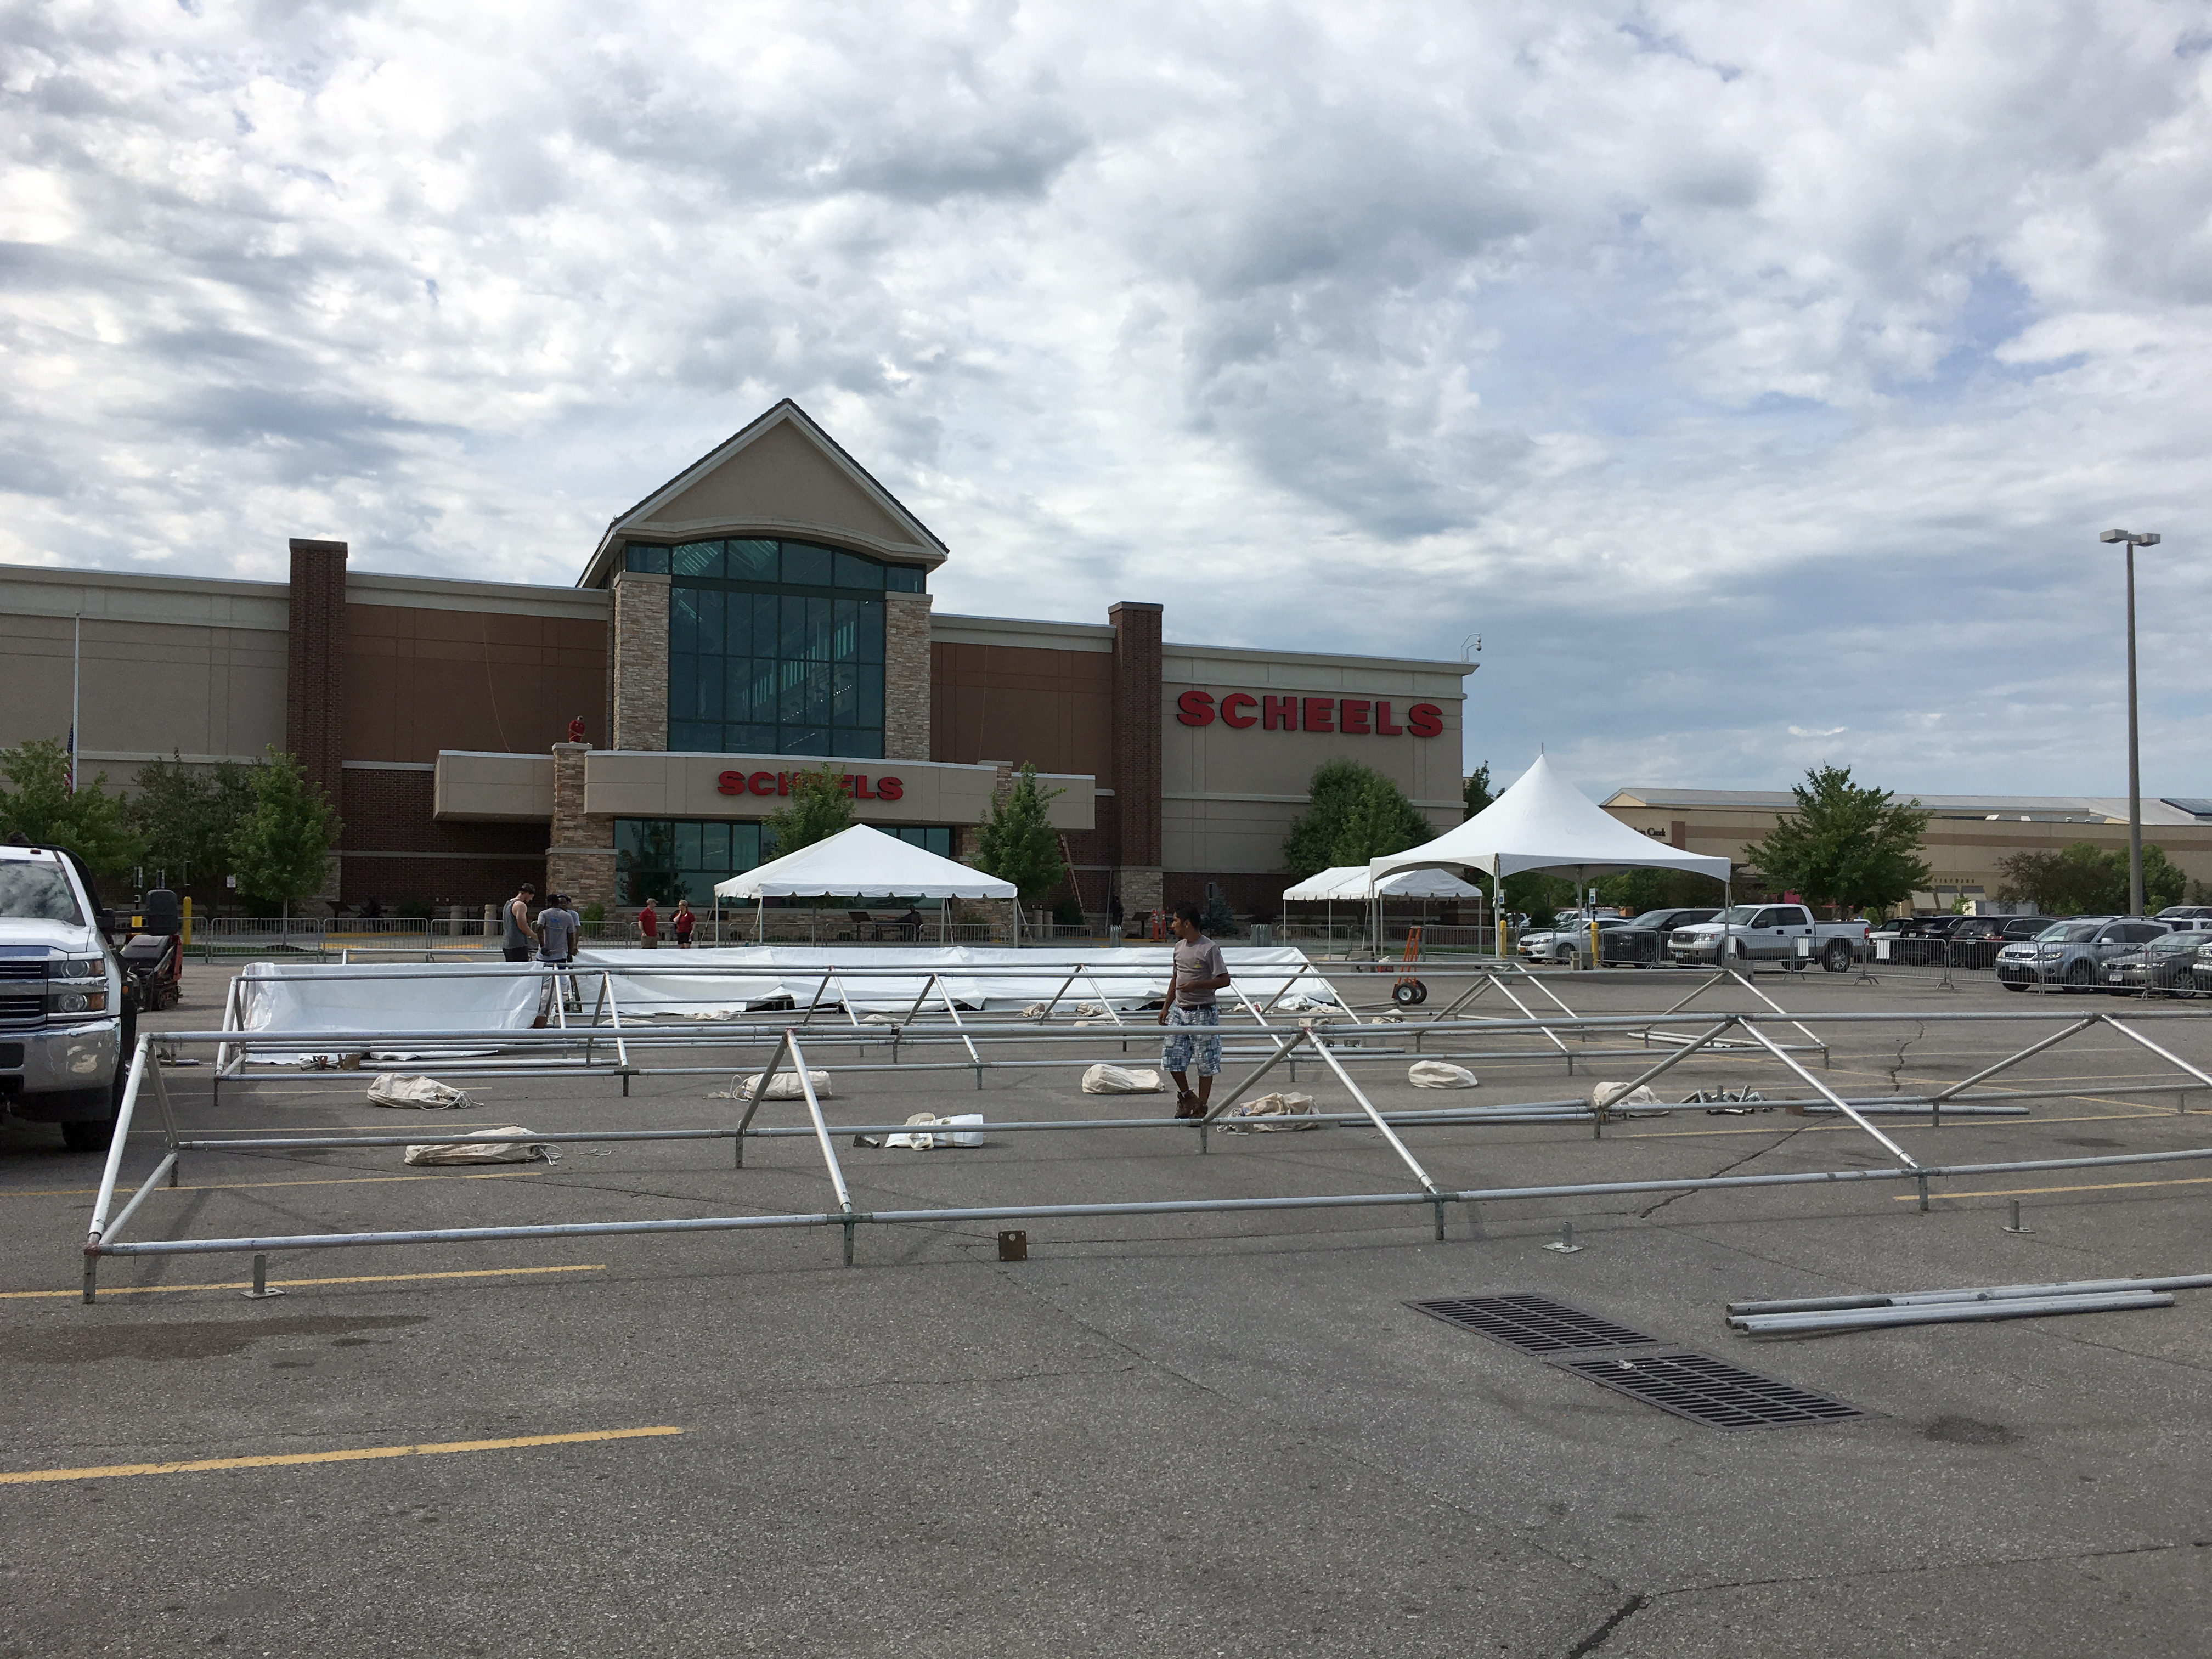 Setting up frame tents at Scheels in Des Moines, Iowa